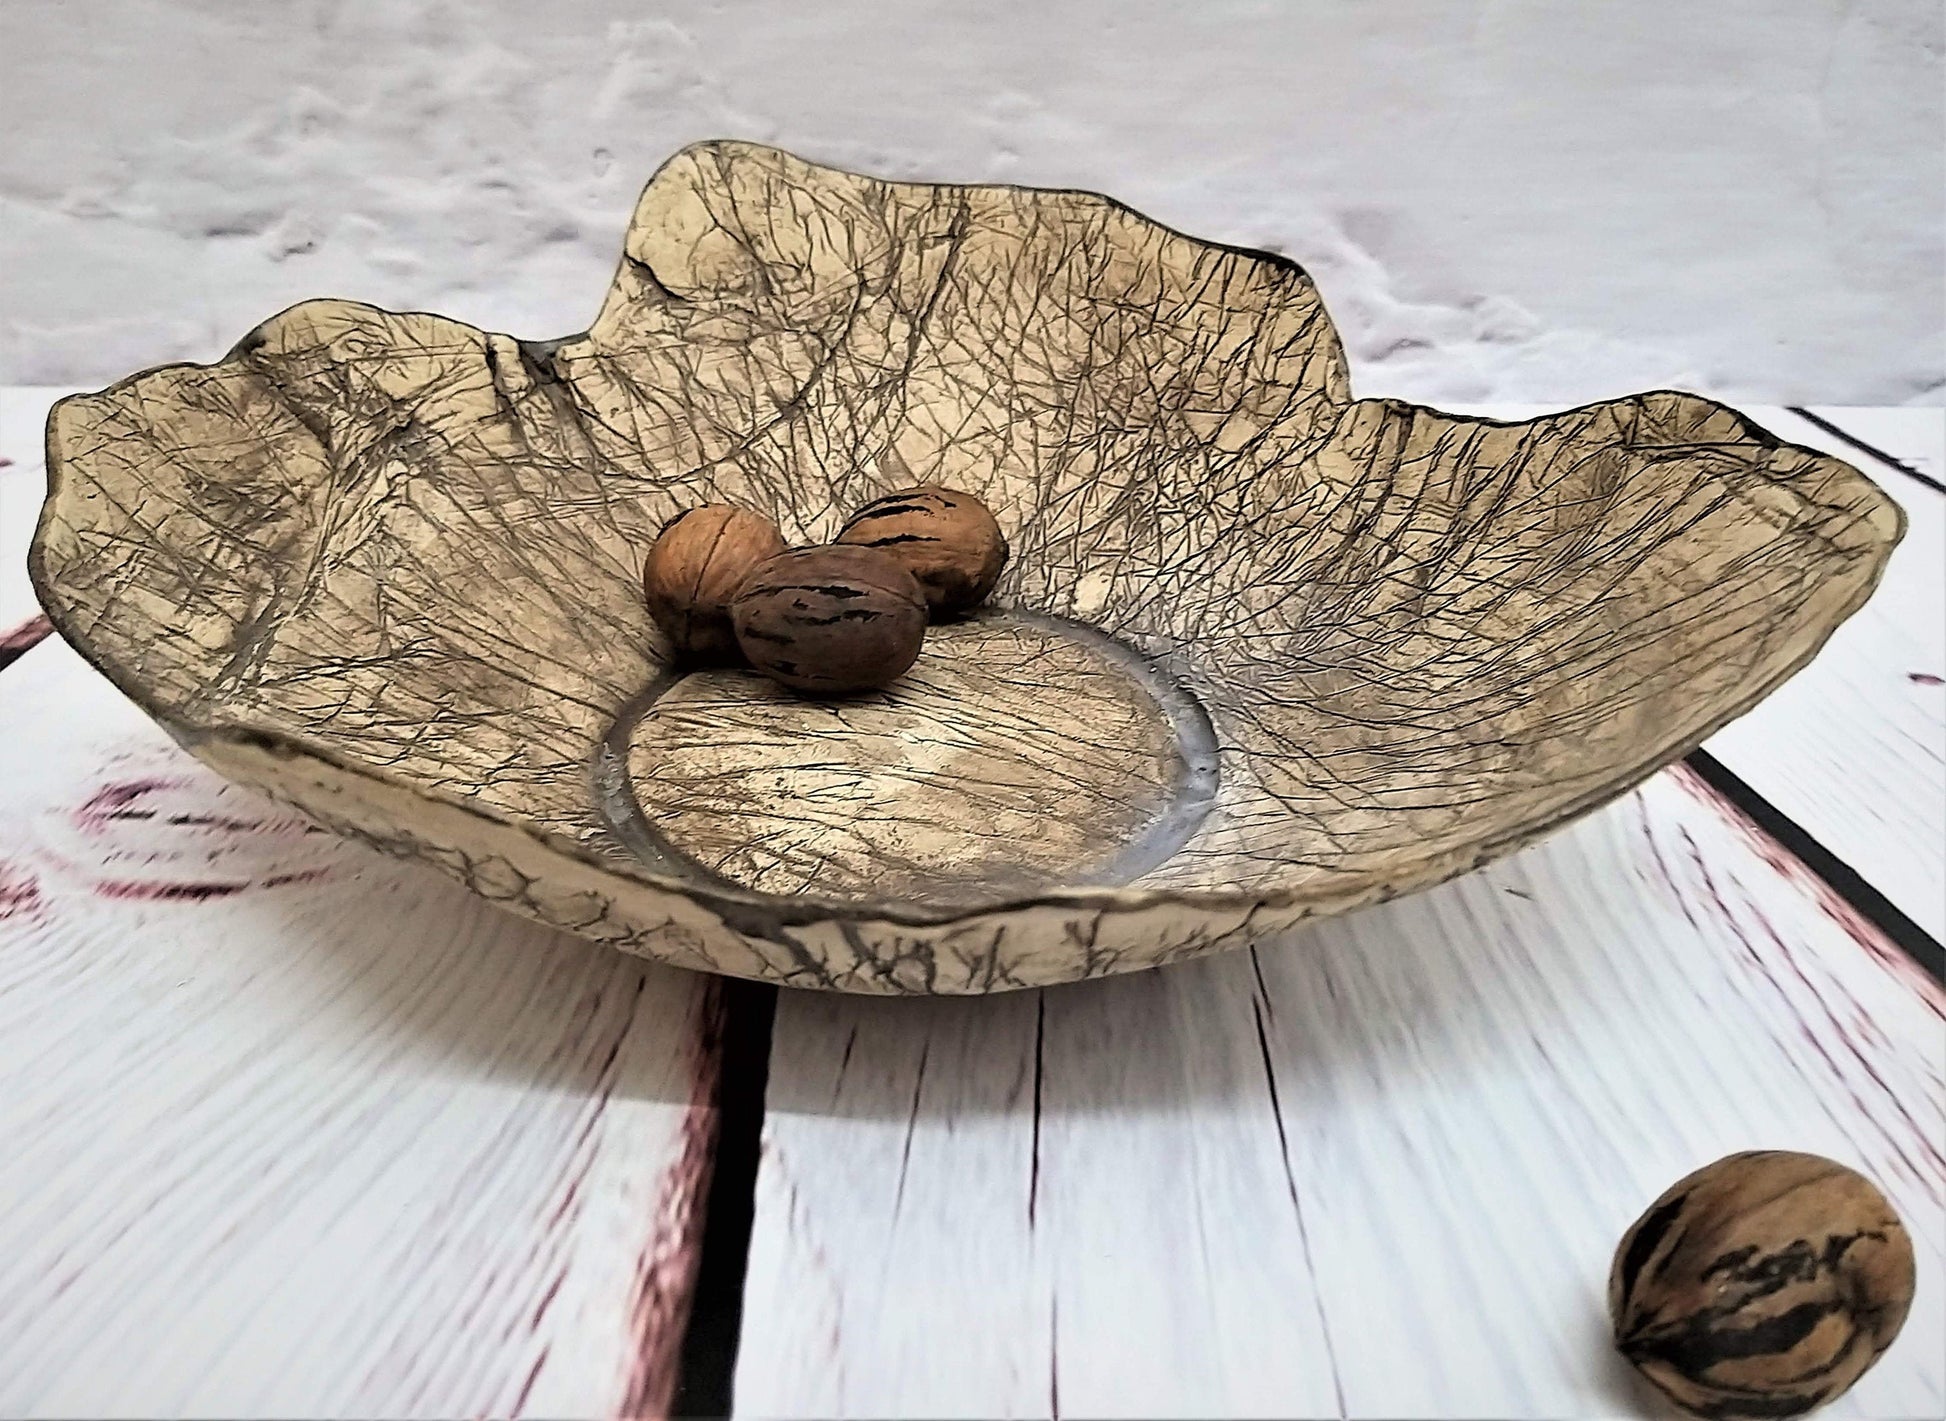 Modern Pottery Centerpiece, Large Ceramic Fruit Bowl for Dining